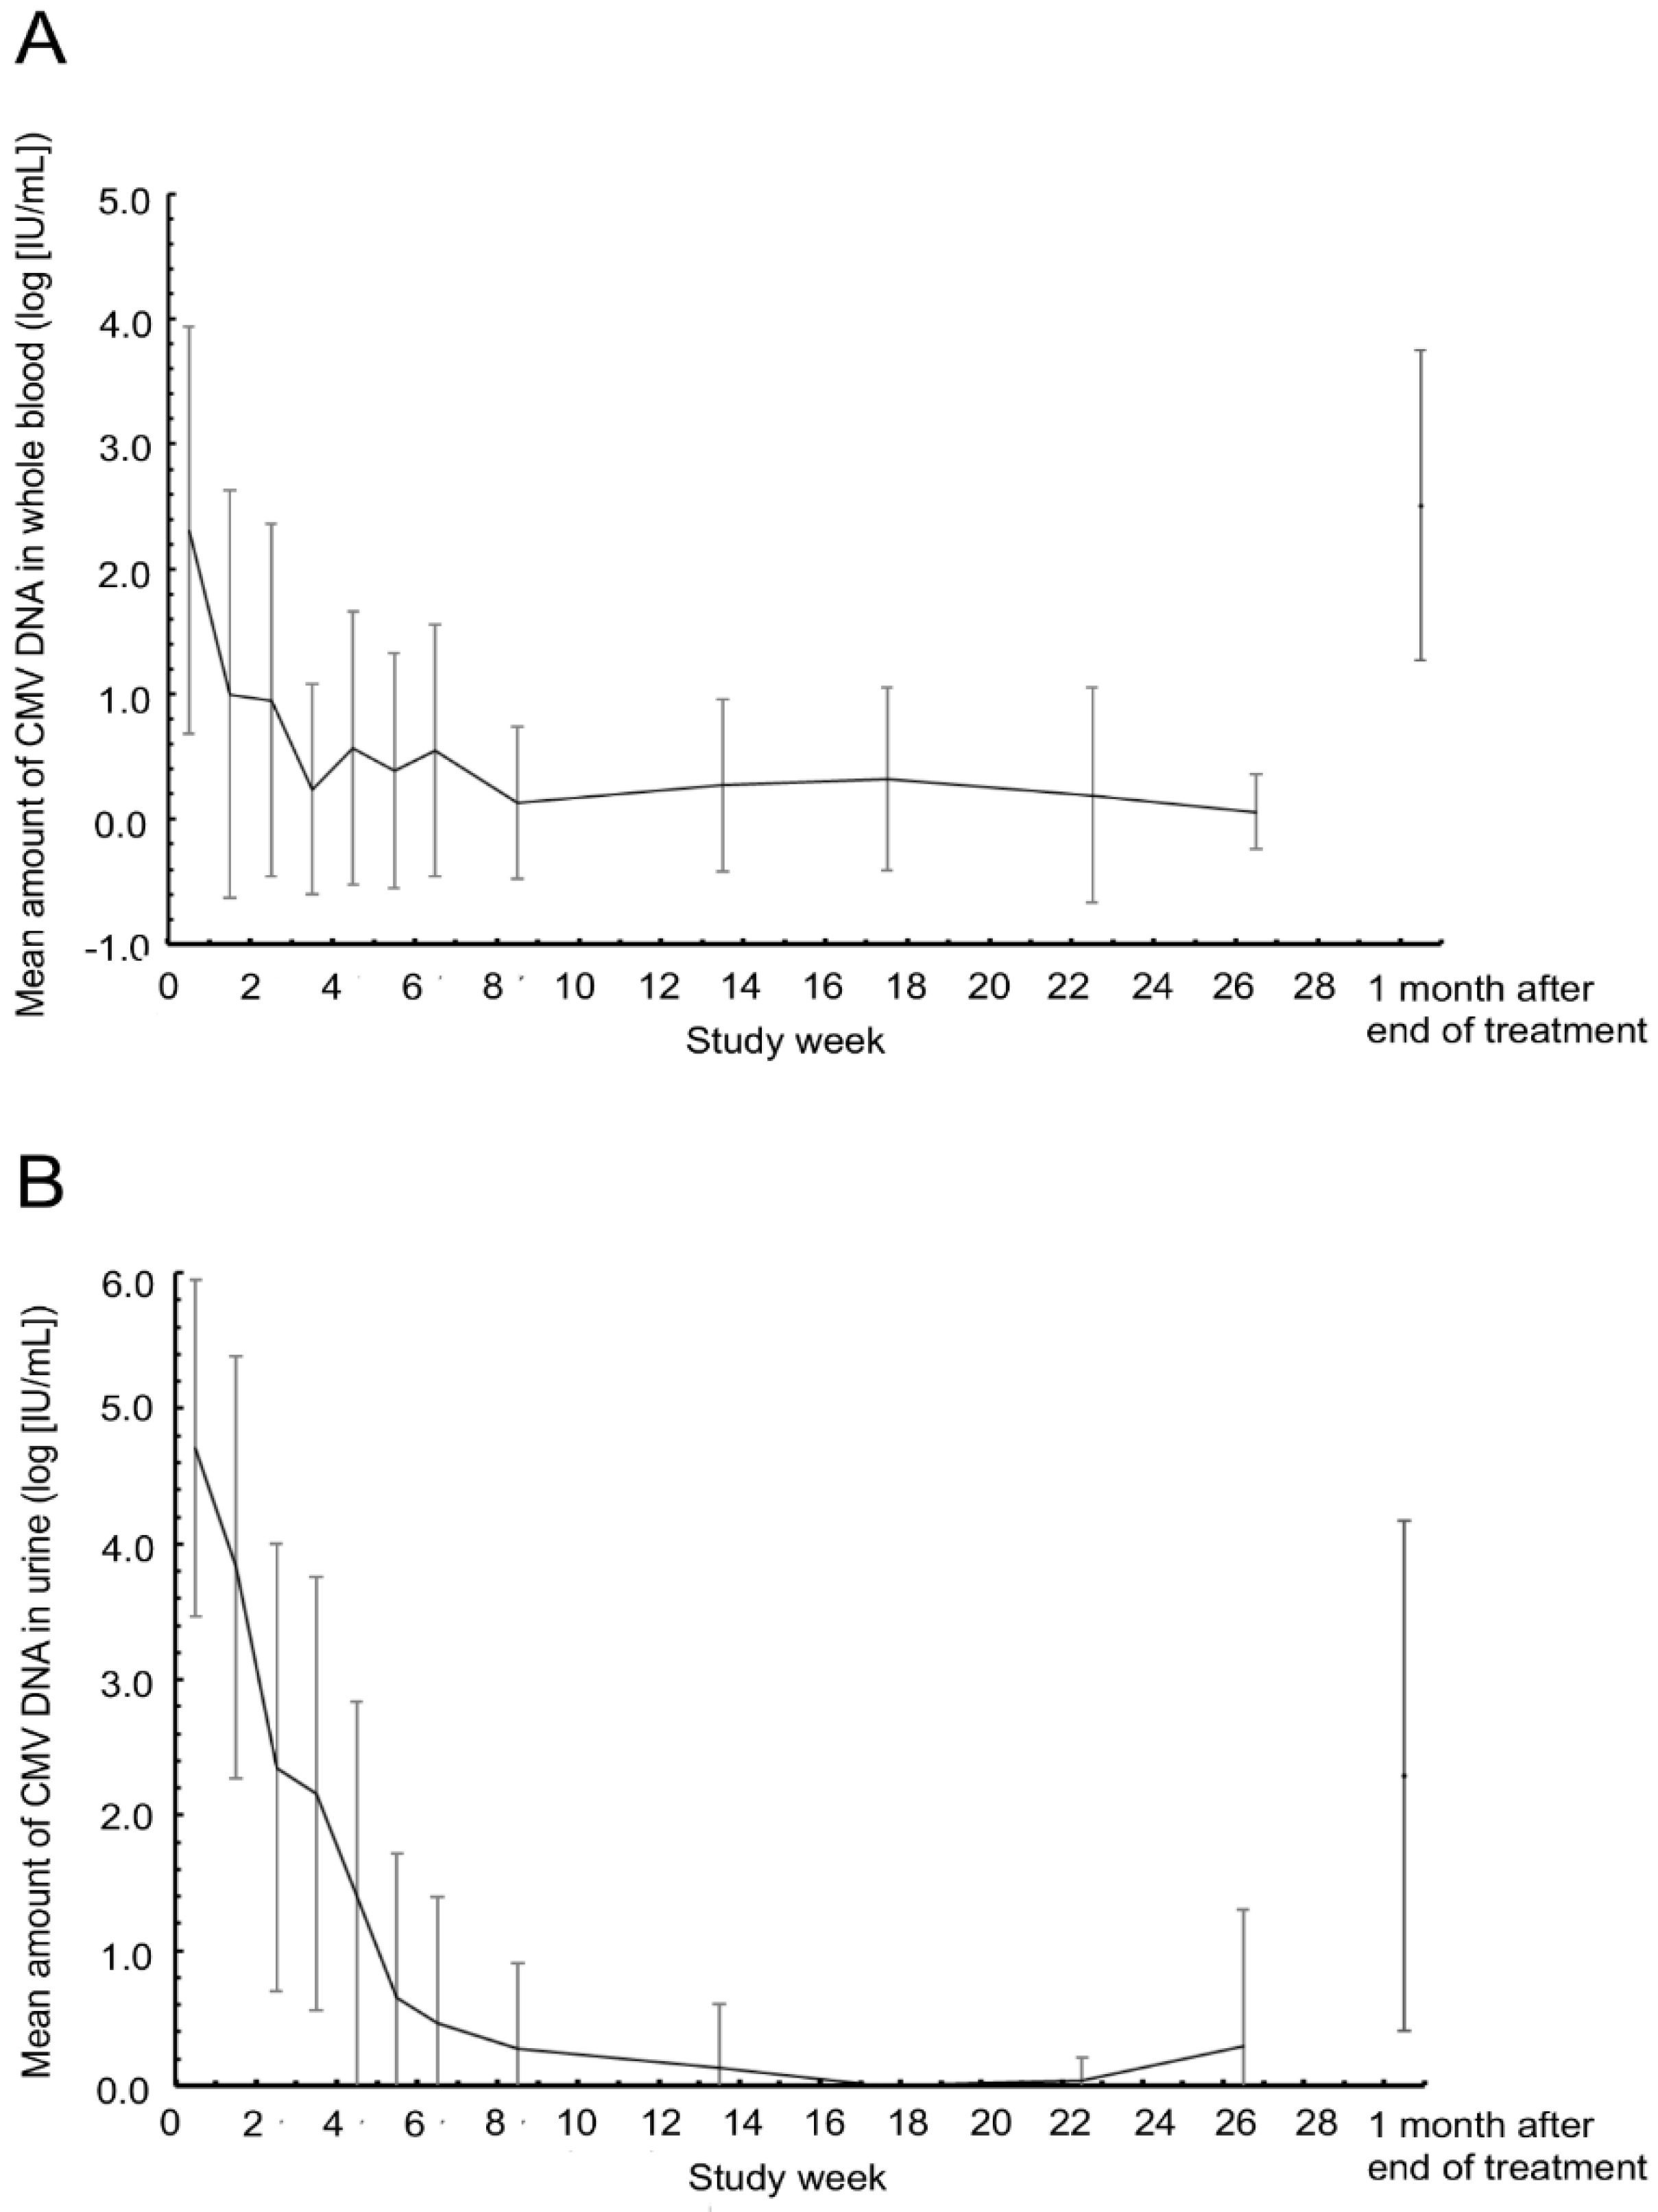 JCM | Free Full-Text | Oral Valganciclovir Therapy in Infants Aged &le;2  Months with Congenital Cytomegalovirus Disease: A Multicenter, Single-Arm,  Open-Label Clinical Trial in Japan